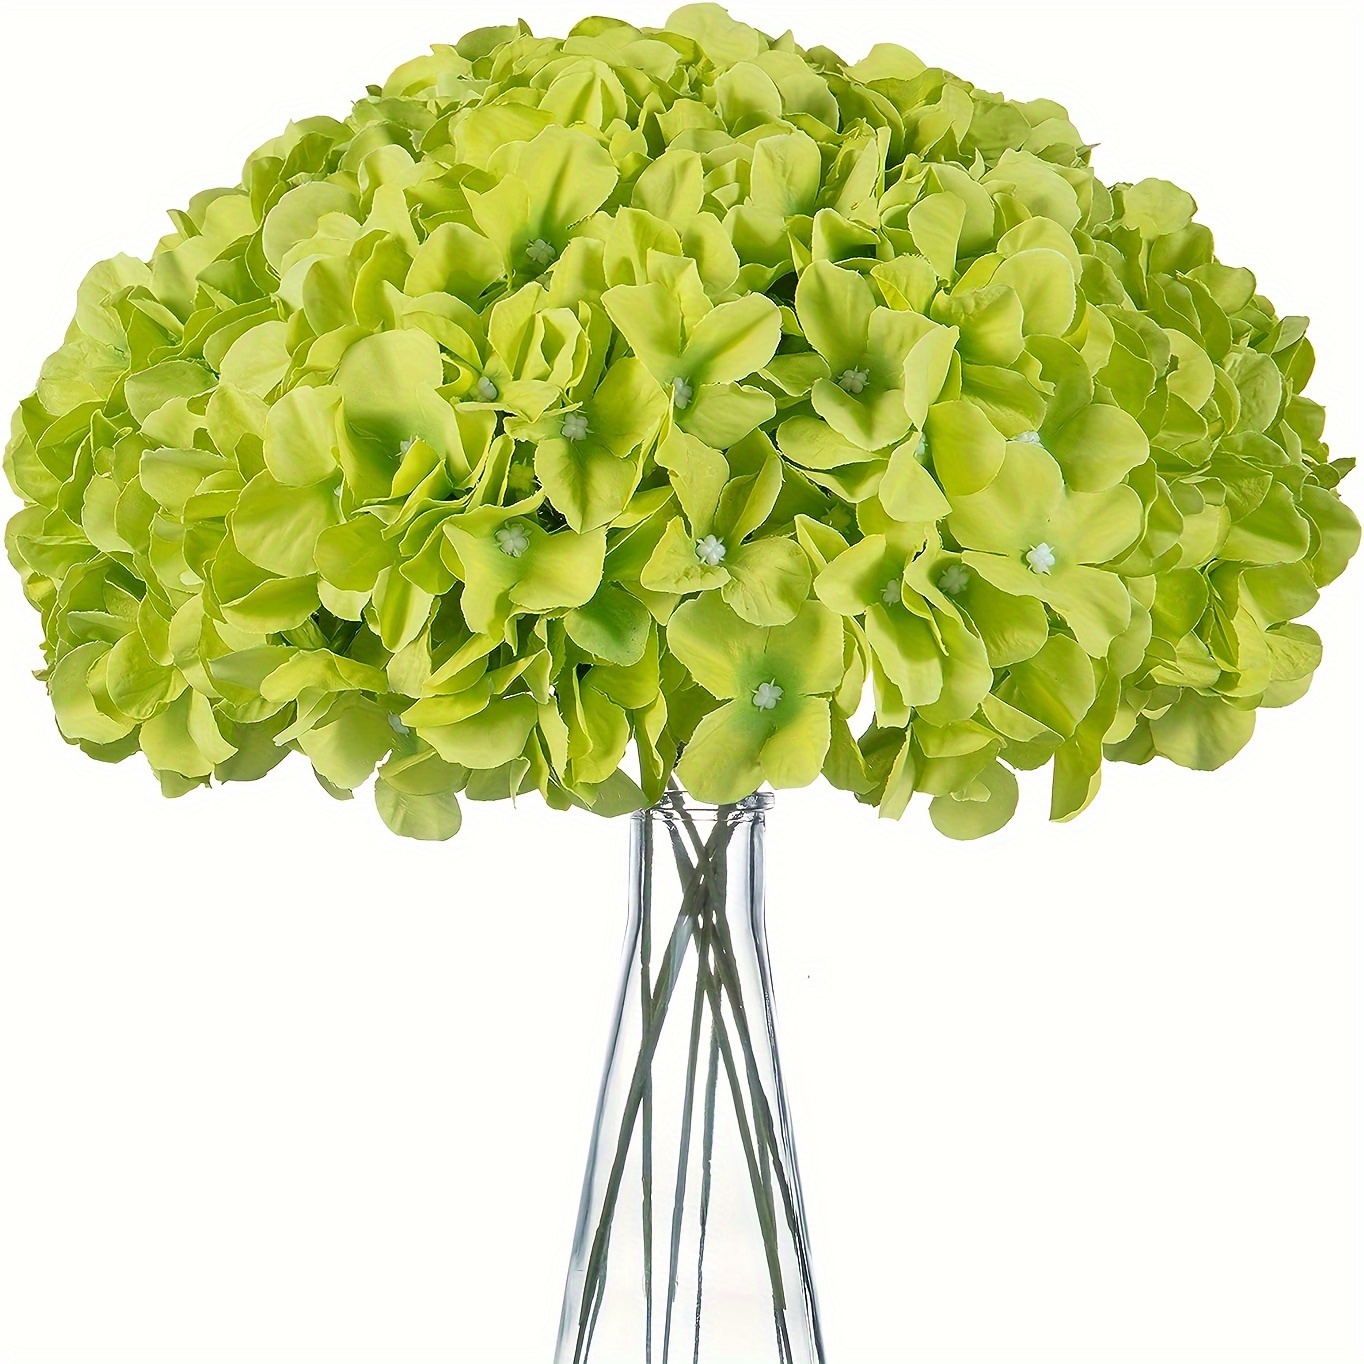 

5pcs Green Hydrangea Silk Fake Flowers Heads With Stems, Artificial Flowers For Decoration Wedding Home Party Shop Shower, Room Decor For Bedroom Aesthetic